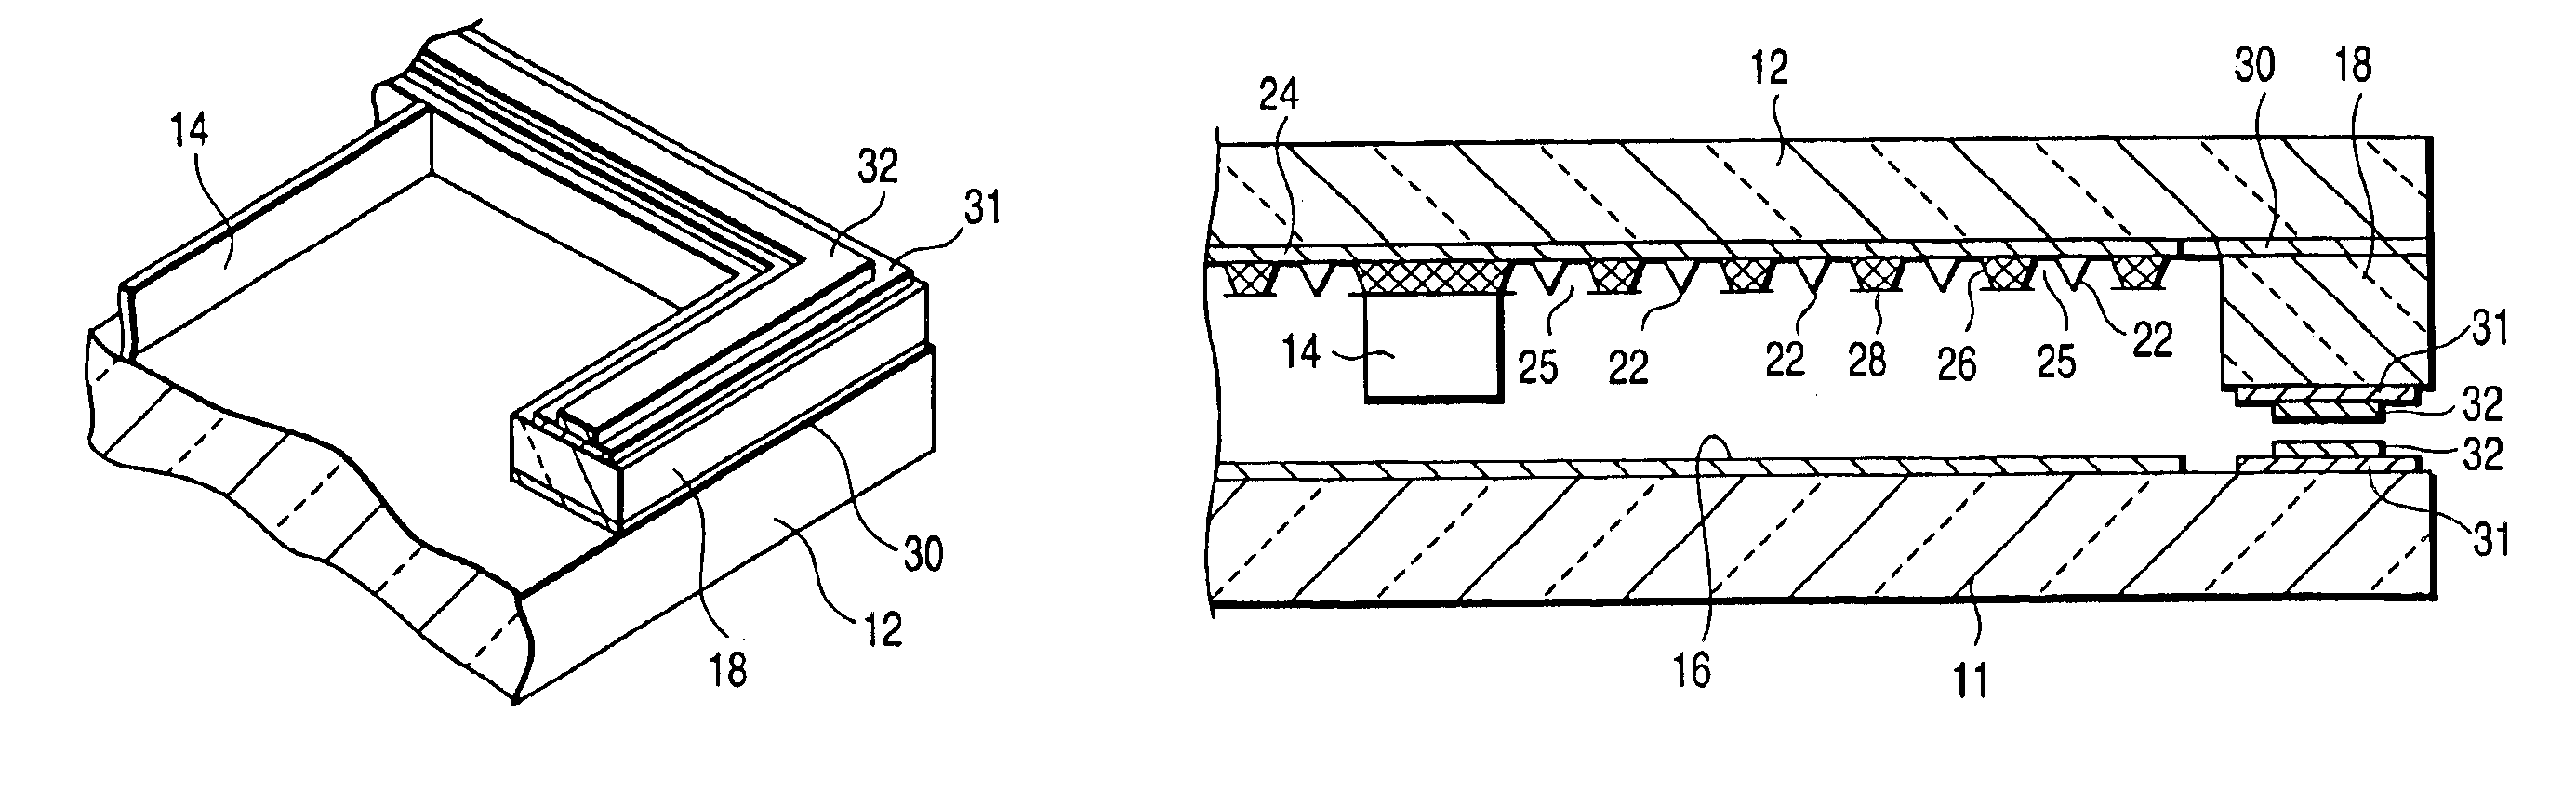 Image display apparatus and method of manufacturing the same